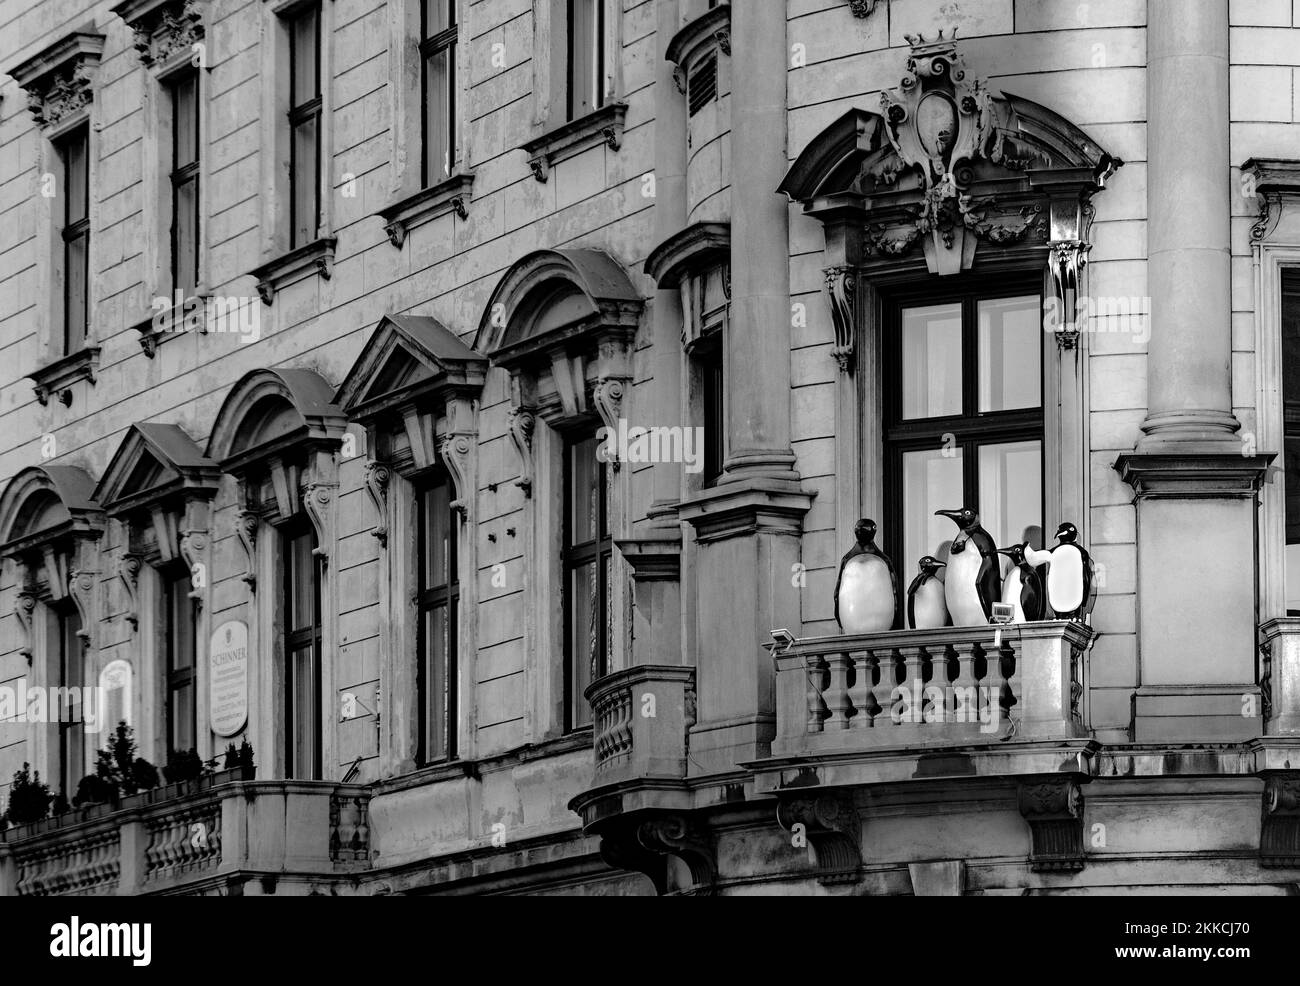 VIENNA, AUSTRIA - FEB 16, 2019: penguin puppets at an old balcony look down ti the street in Vienna. Stock Photo